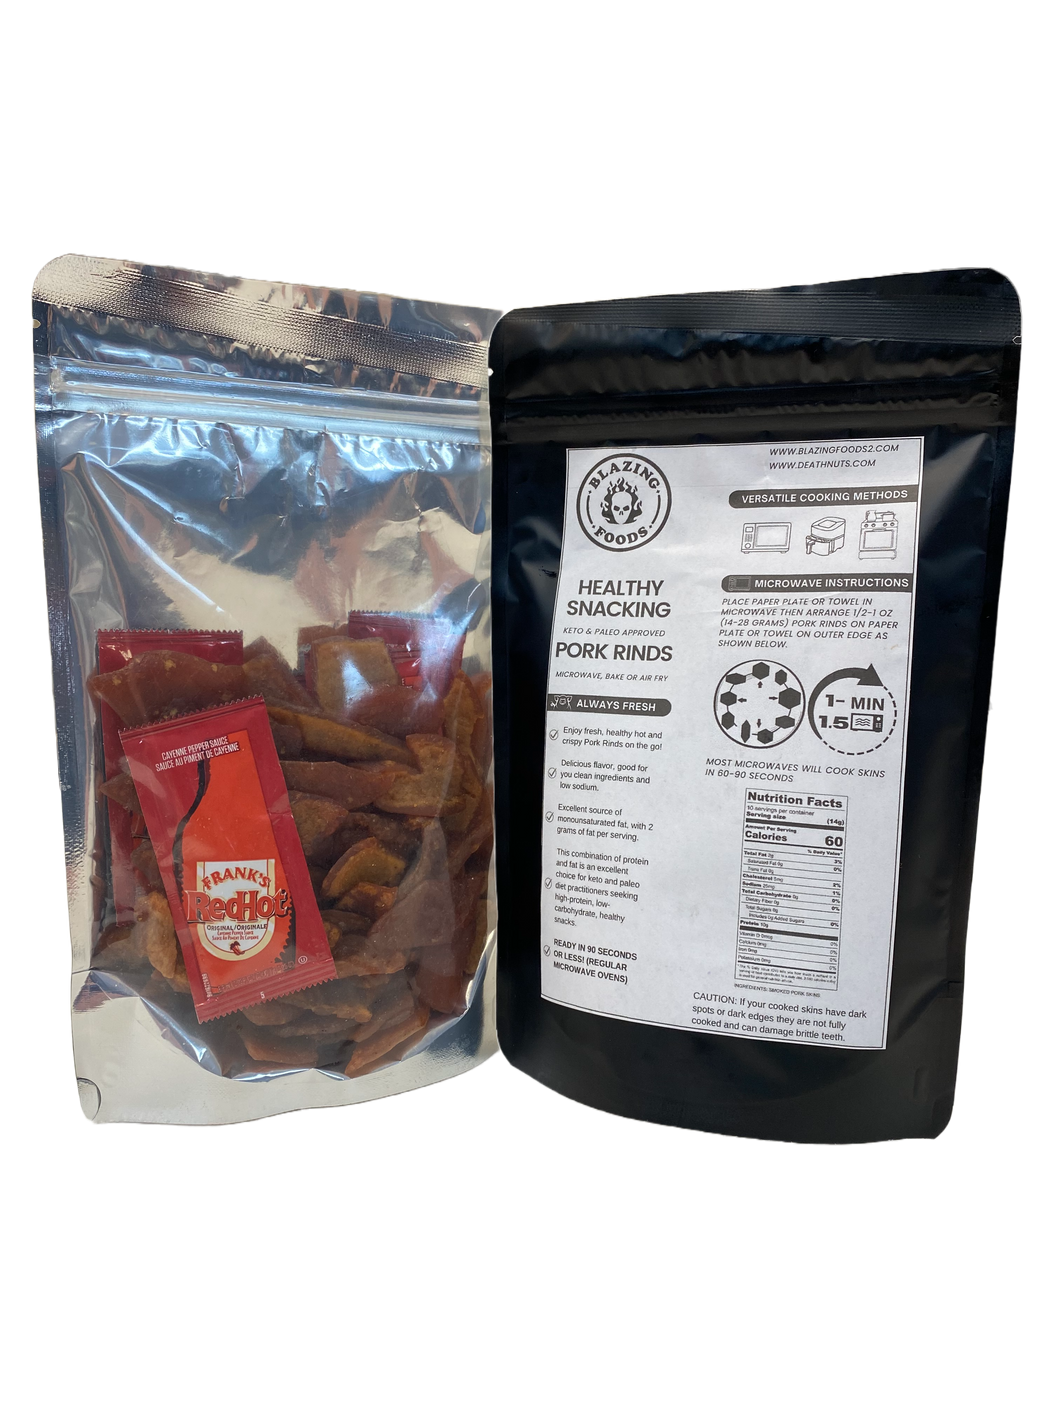 PORK RINDS - 10 servings - healthy snacking cooks in microwave, oven or air fryer